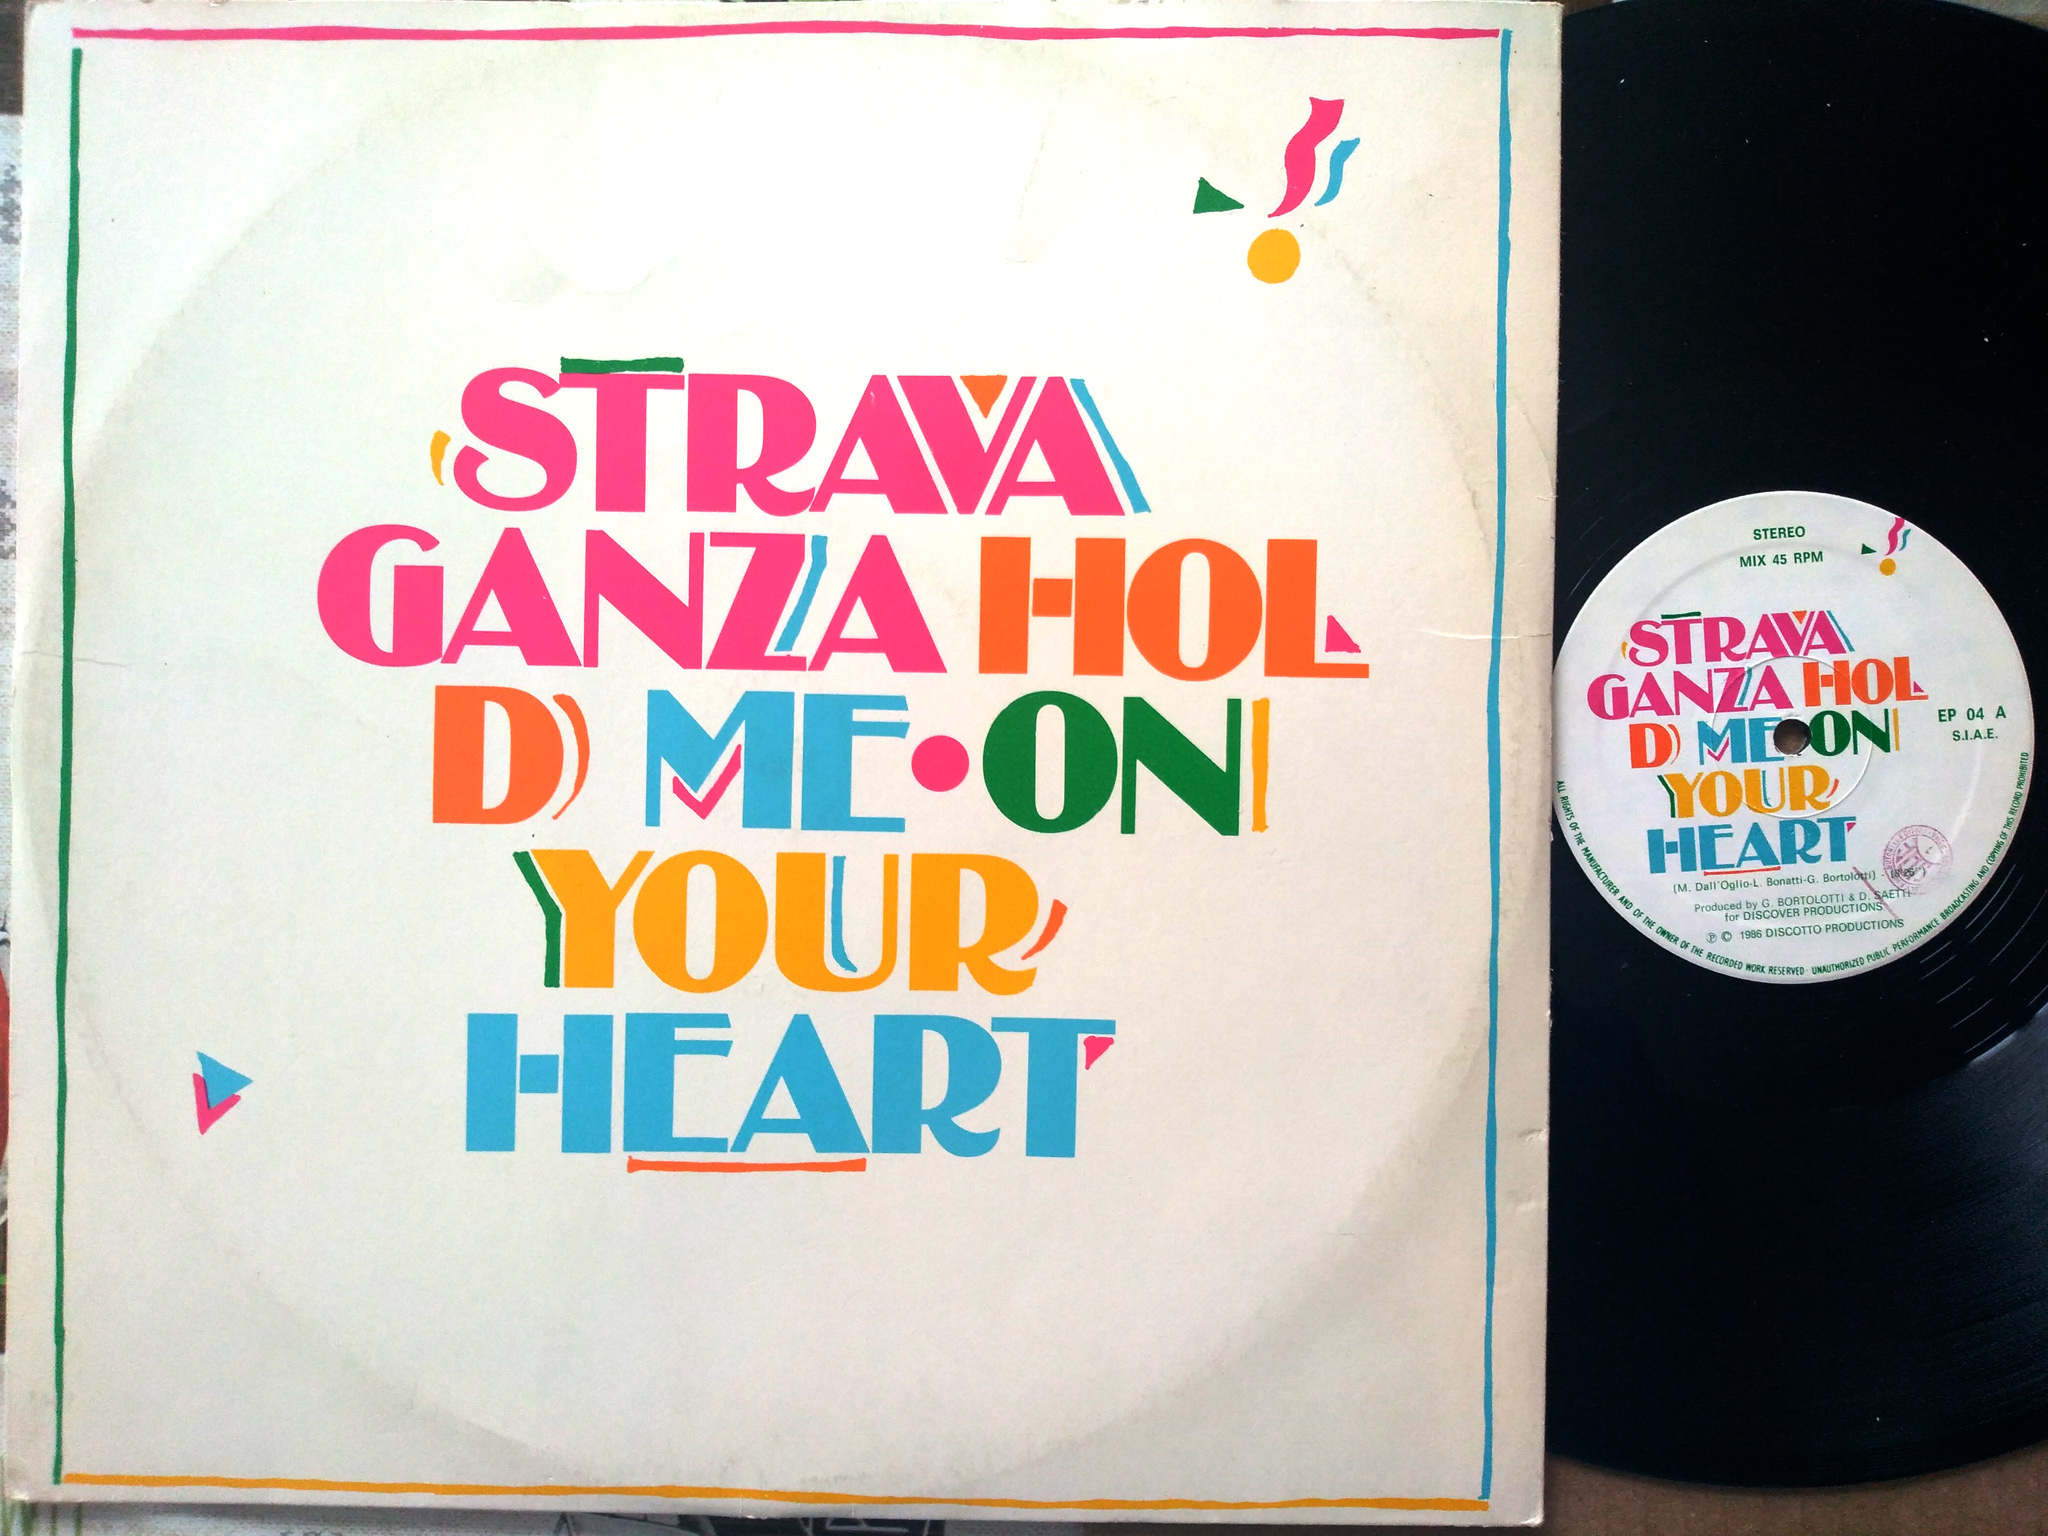 Stravaganza - Hold Me On Your Hear